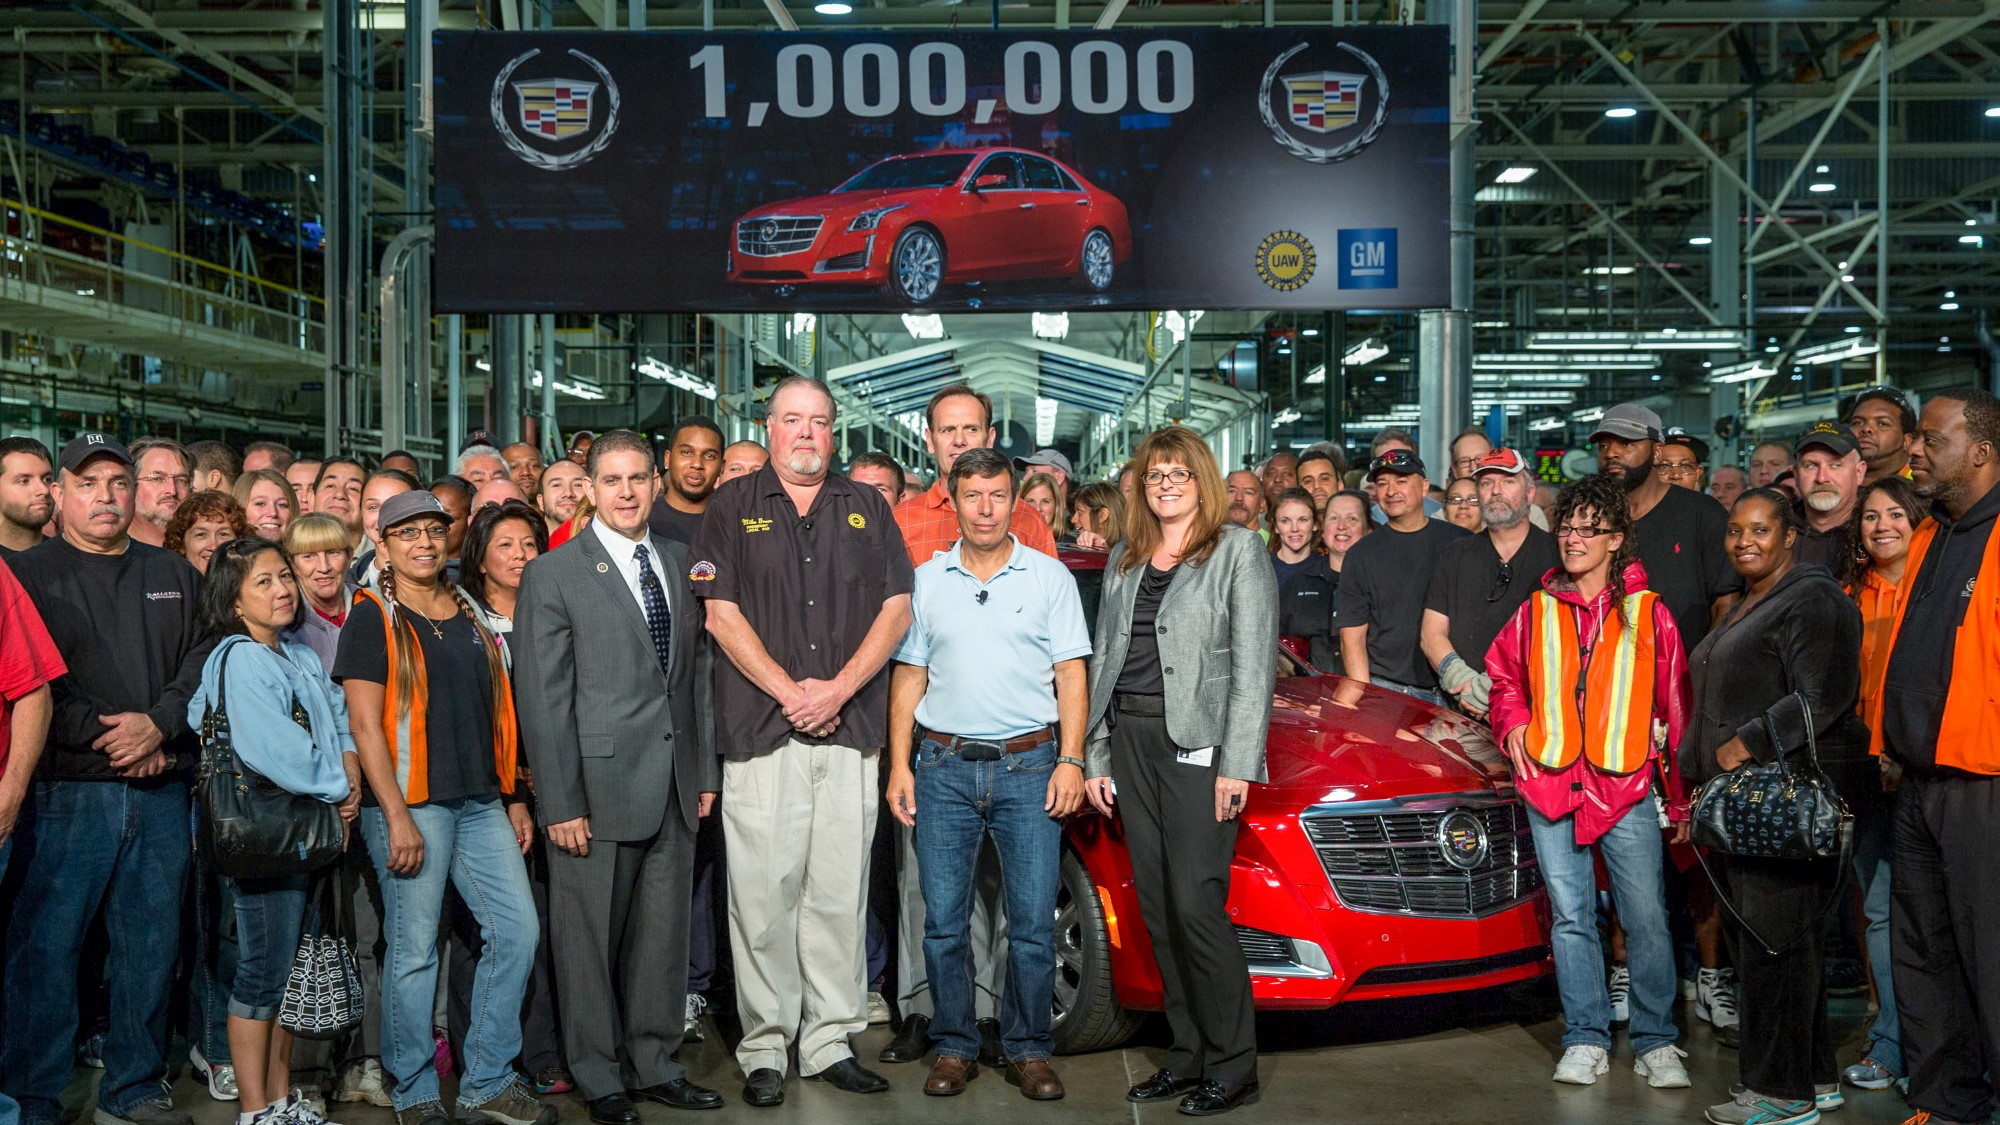 One-millionth Cadillac built is a 2014 CTS.